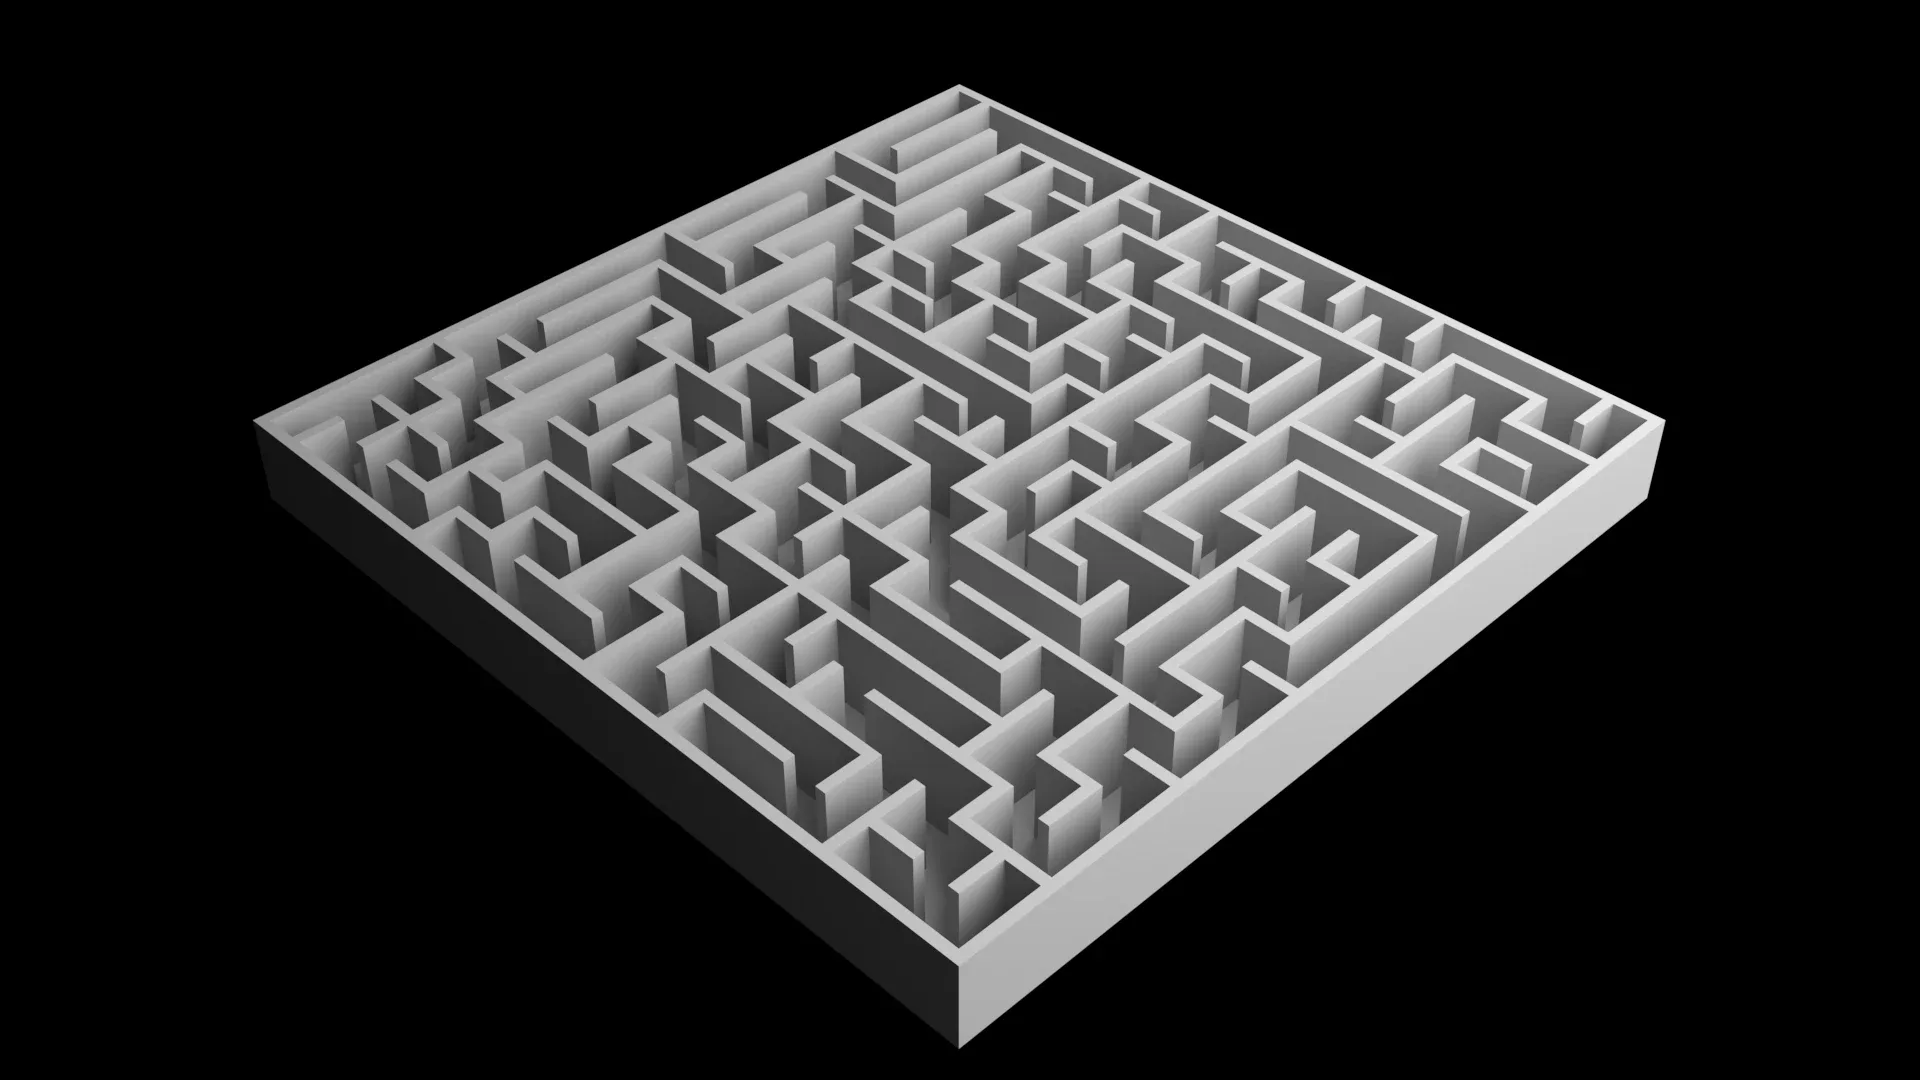 5 Low Poly Square Mazes